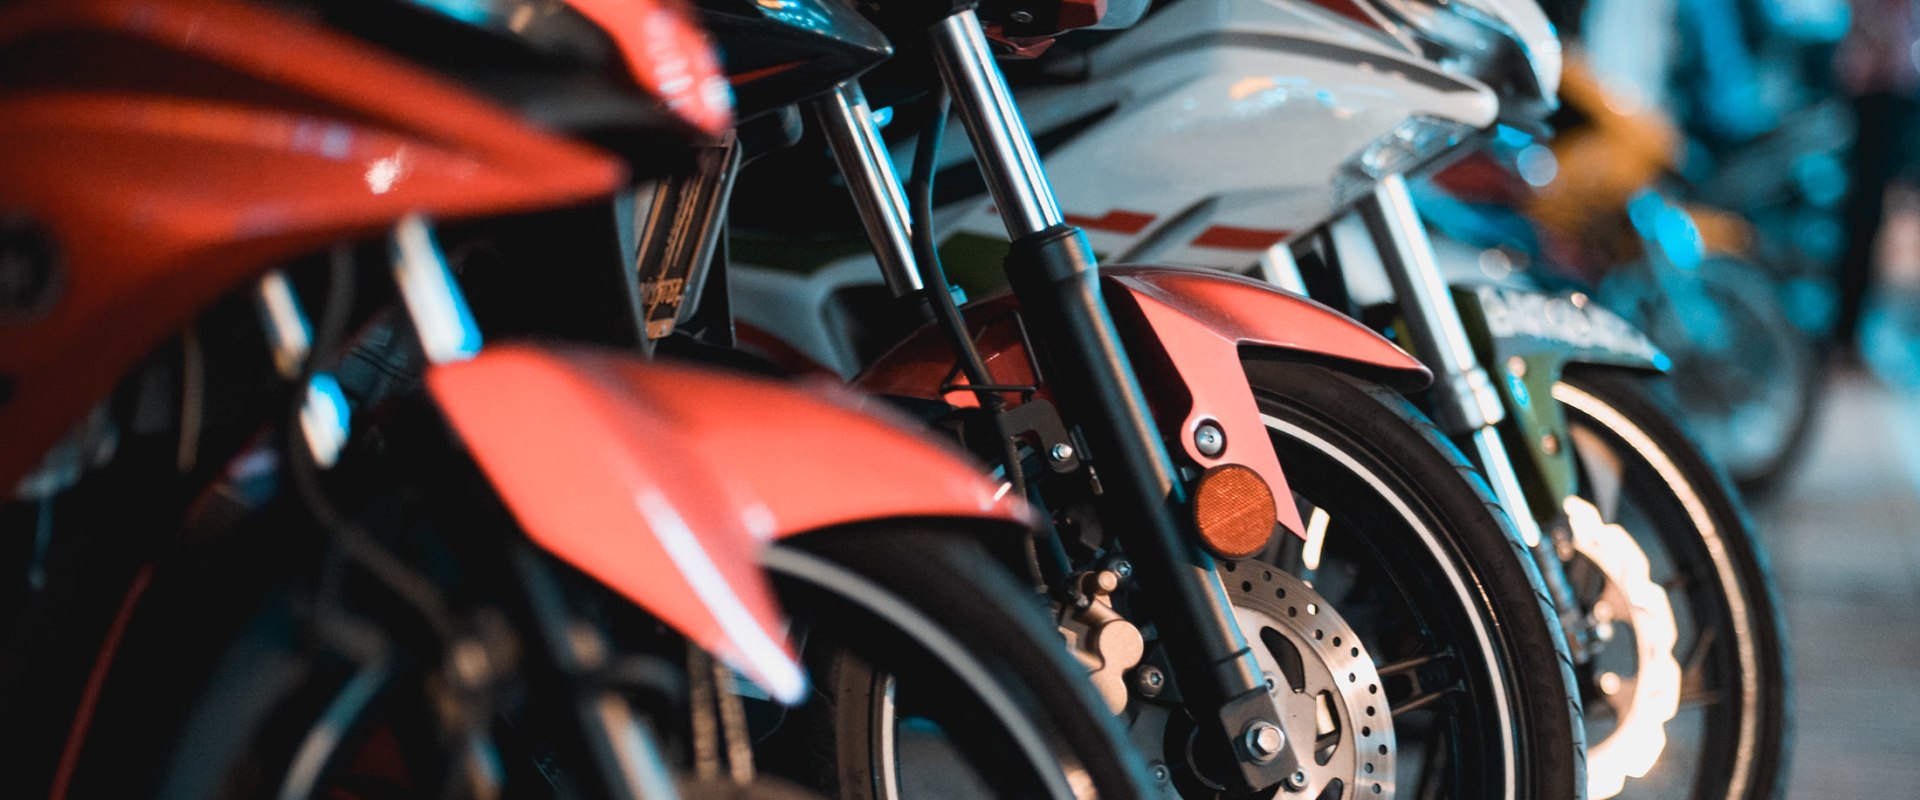 Theft Insurance for European Motorcycles